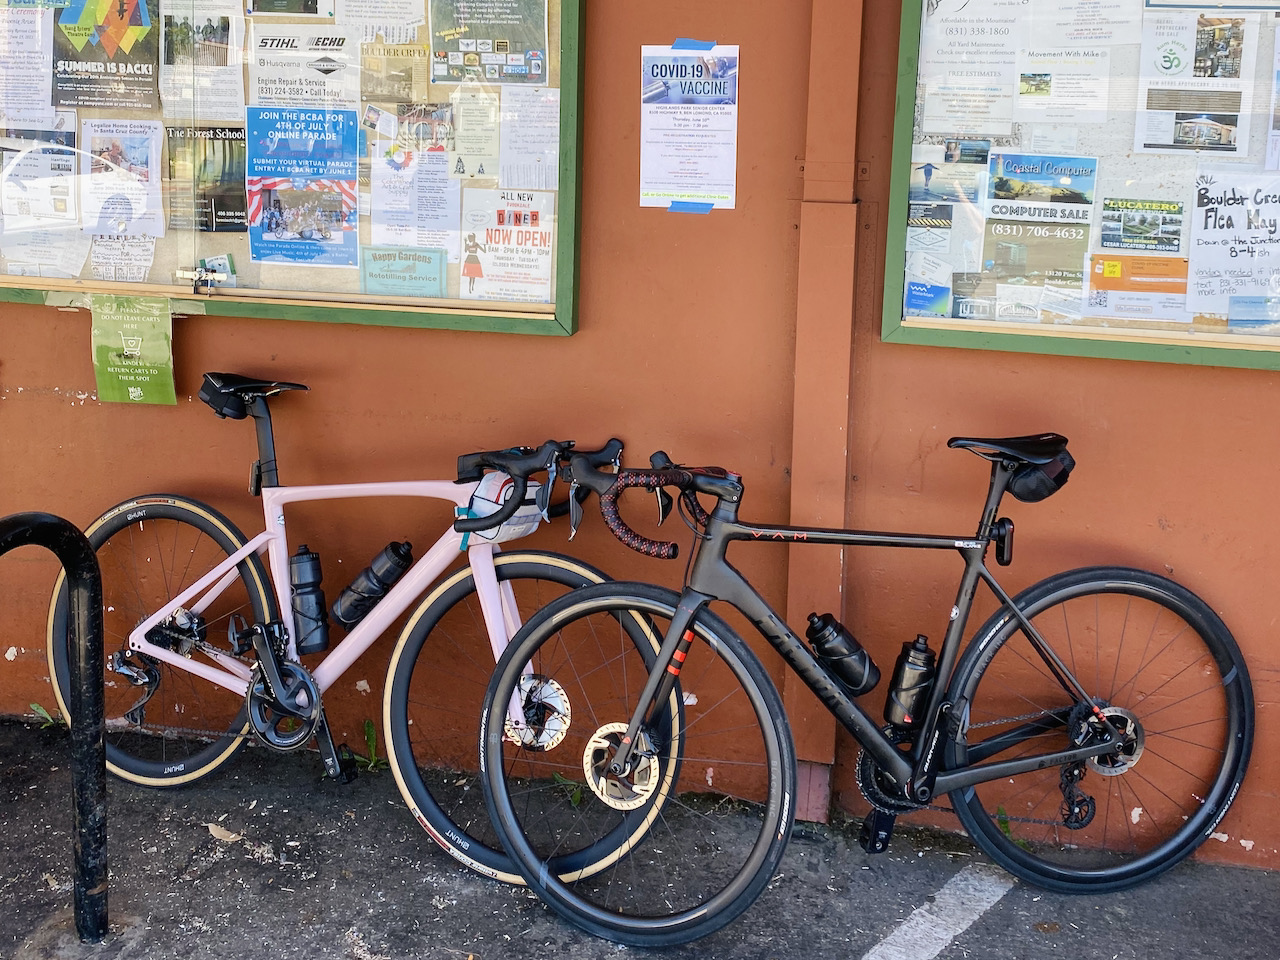 Two bikes leaning against a store wall in Boulder Creek, CA.